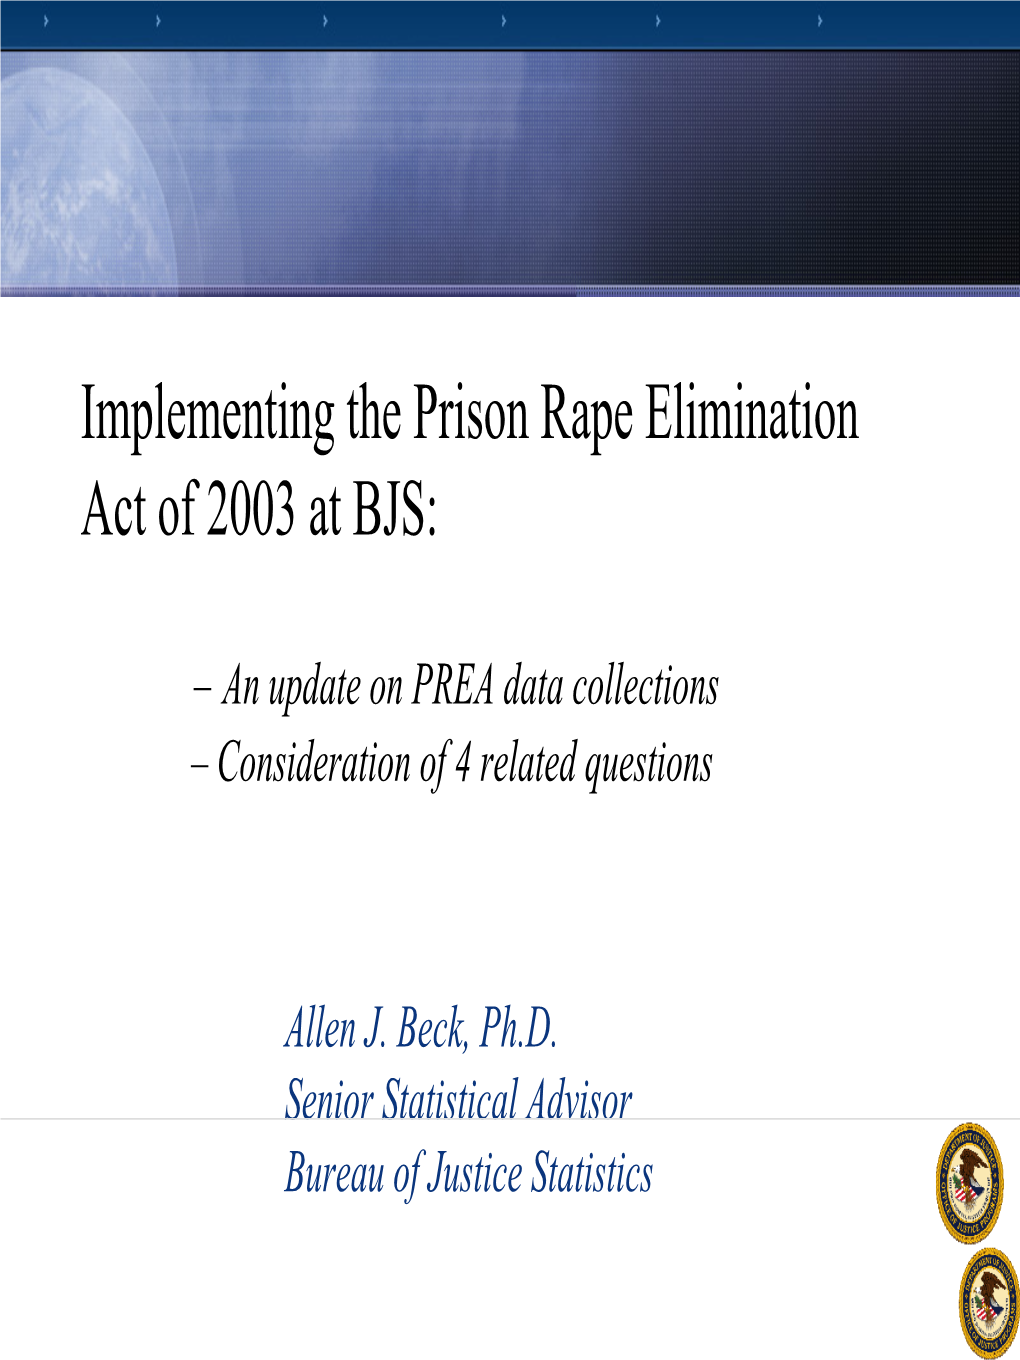 Implementing the Prison Rape Elimination Act of 2003 at BJS